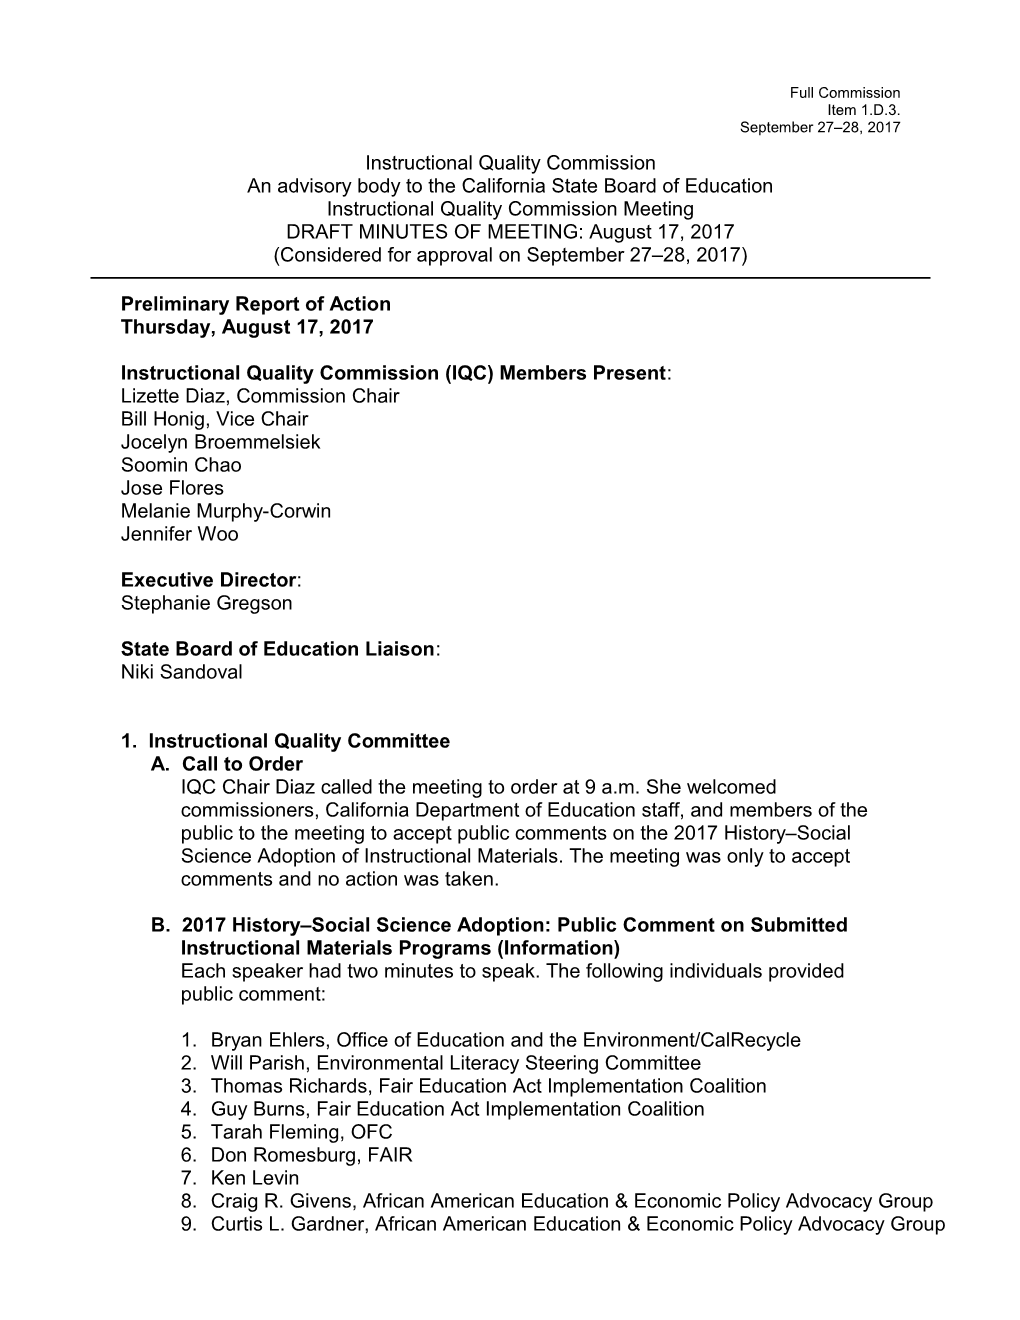 August 17, 2017 IQC Meeting Minutes - Instructional Quality Commission (CA Dept of Education)